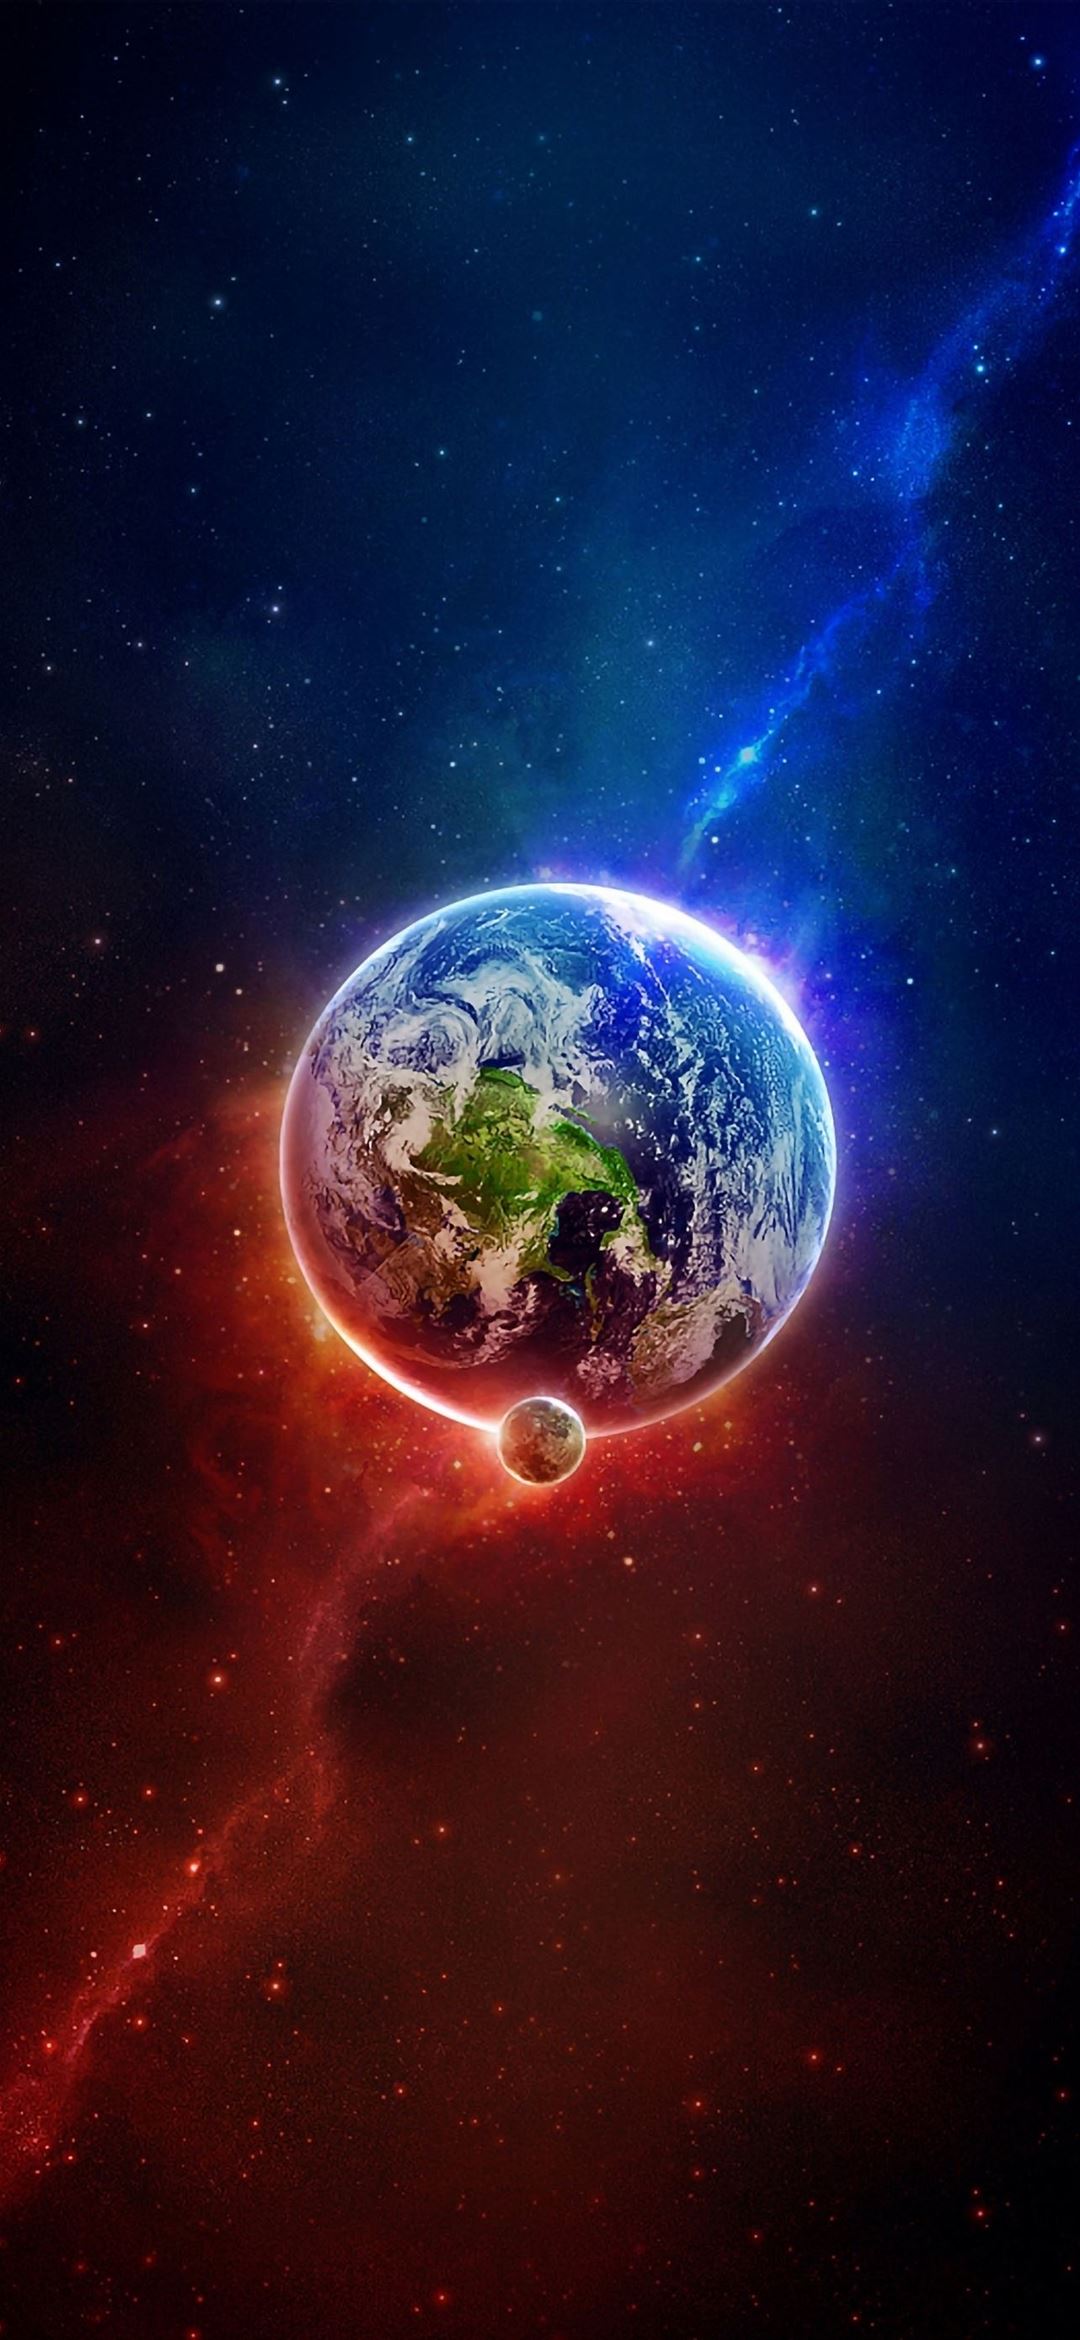 Space in the Earth iPhone Wallpaper Free Download